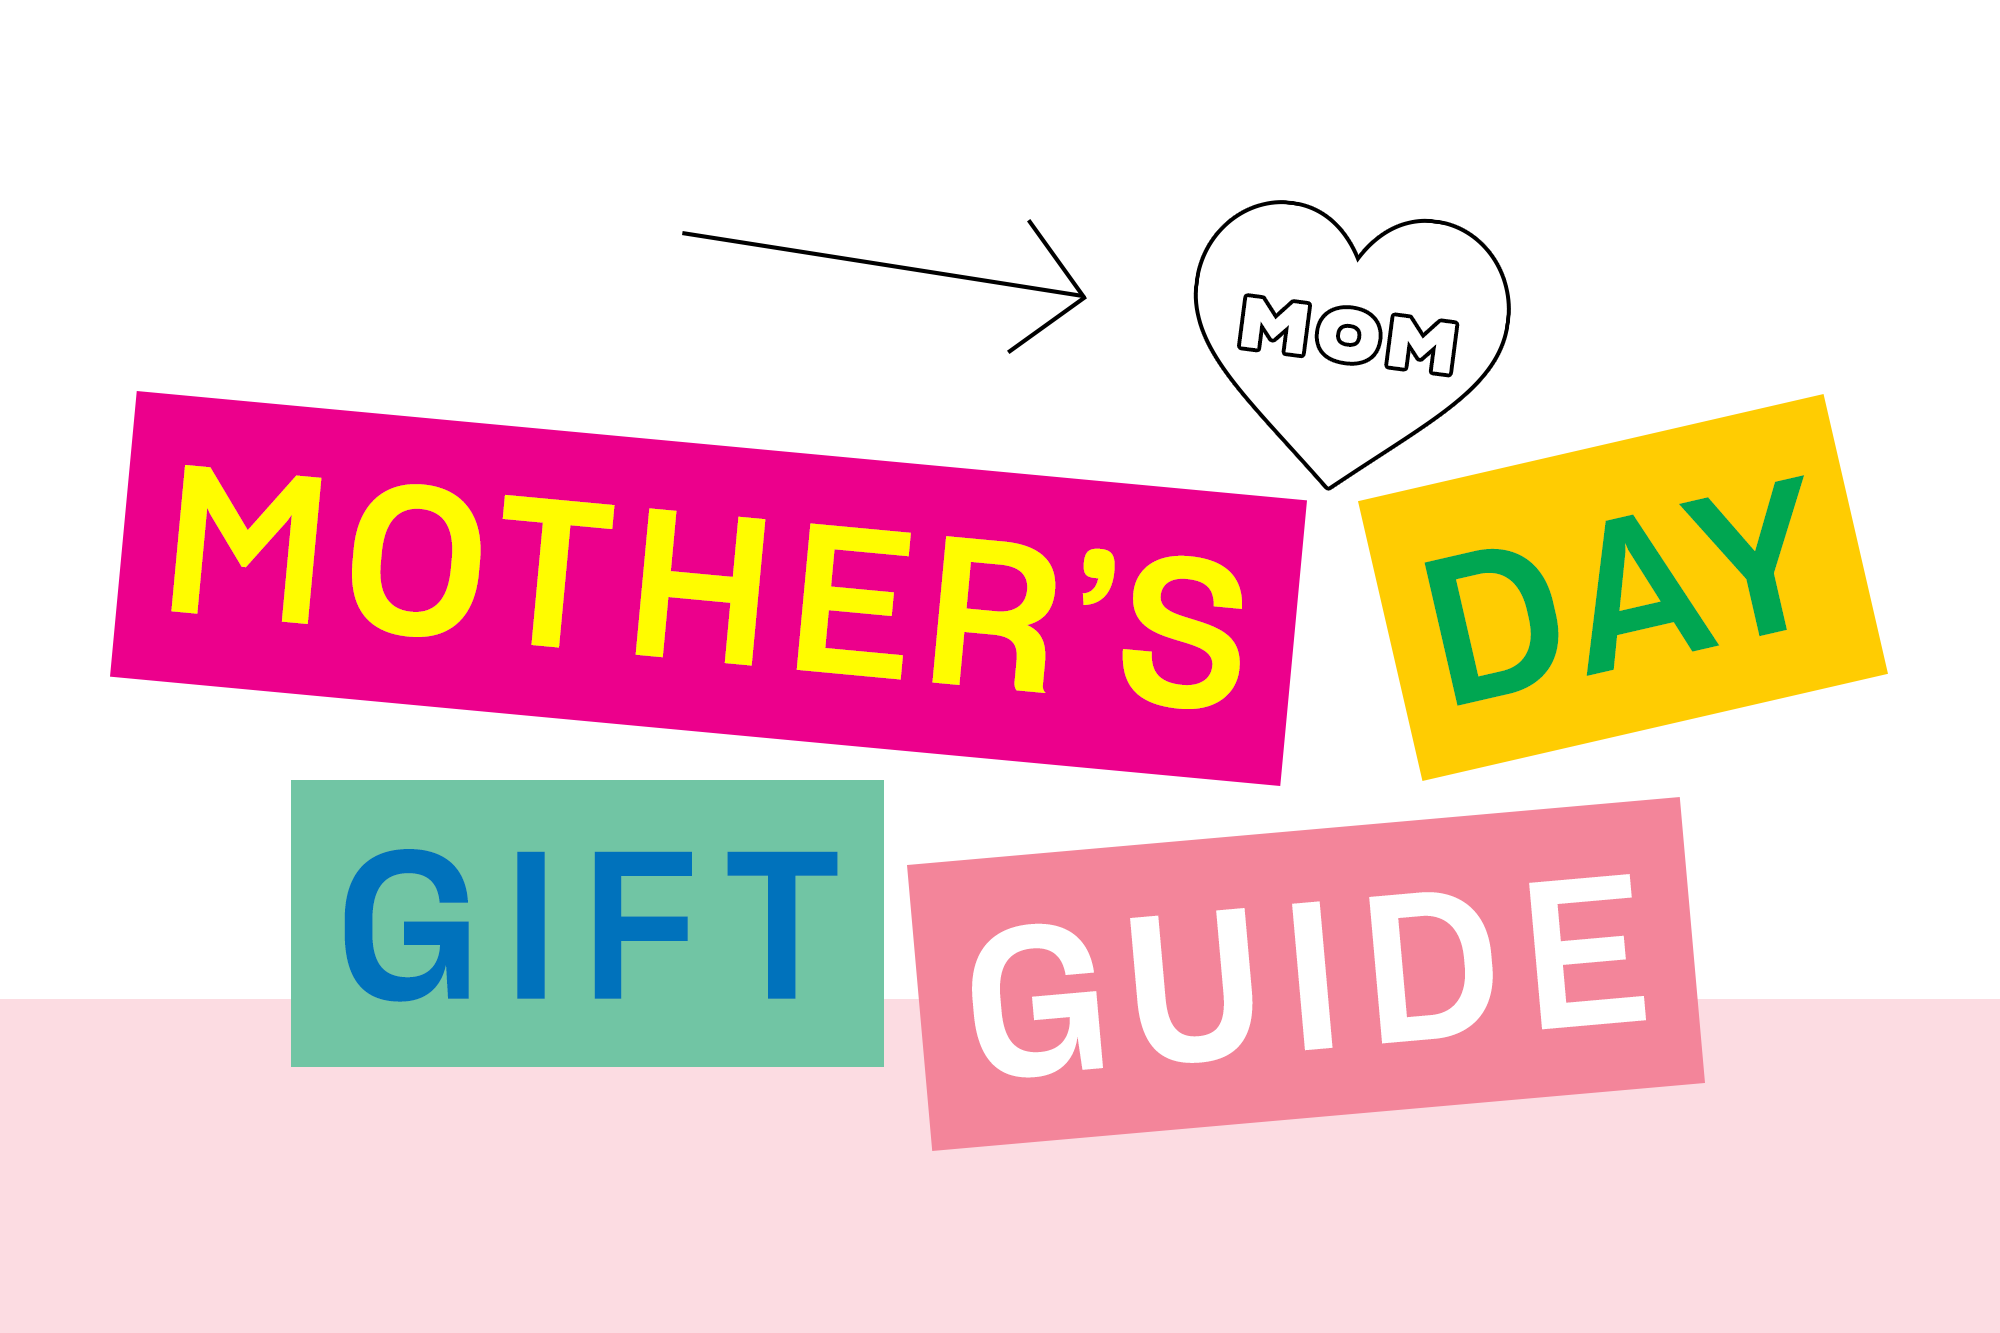 Mother's Day gift ideas for all the special women in your life